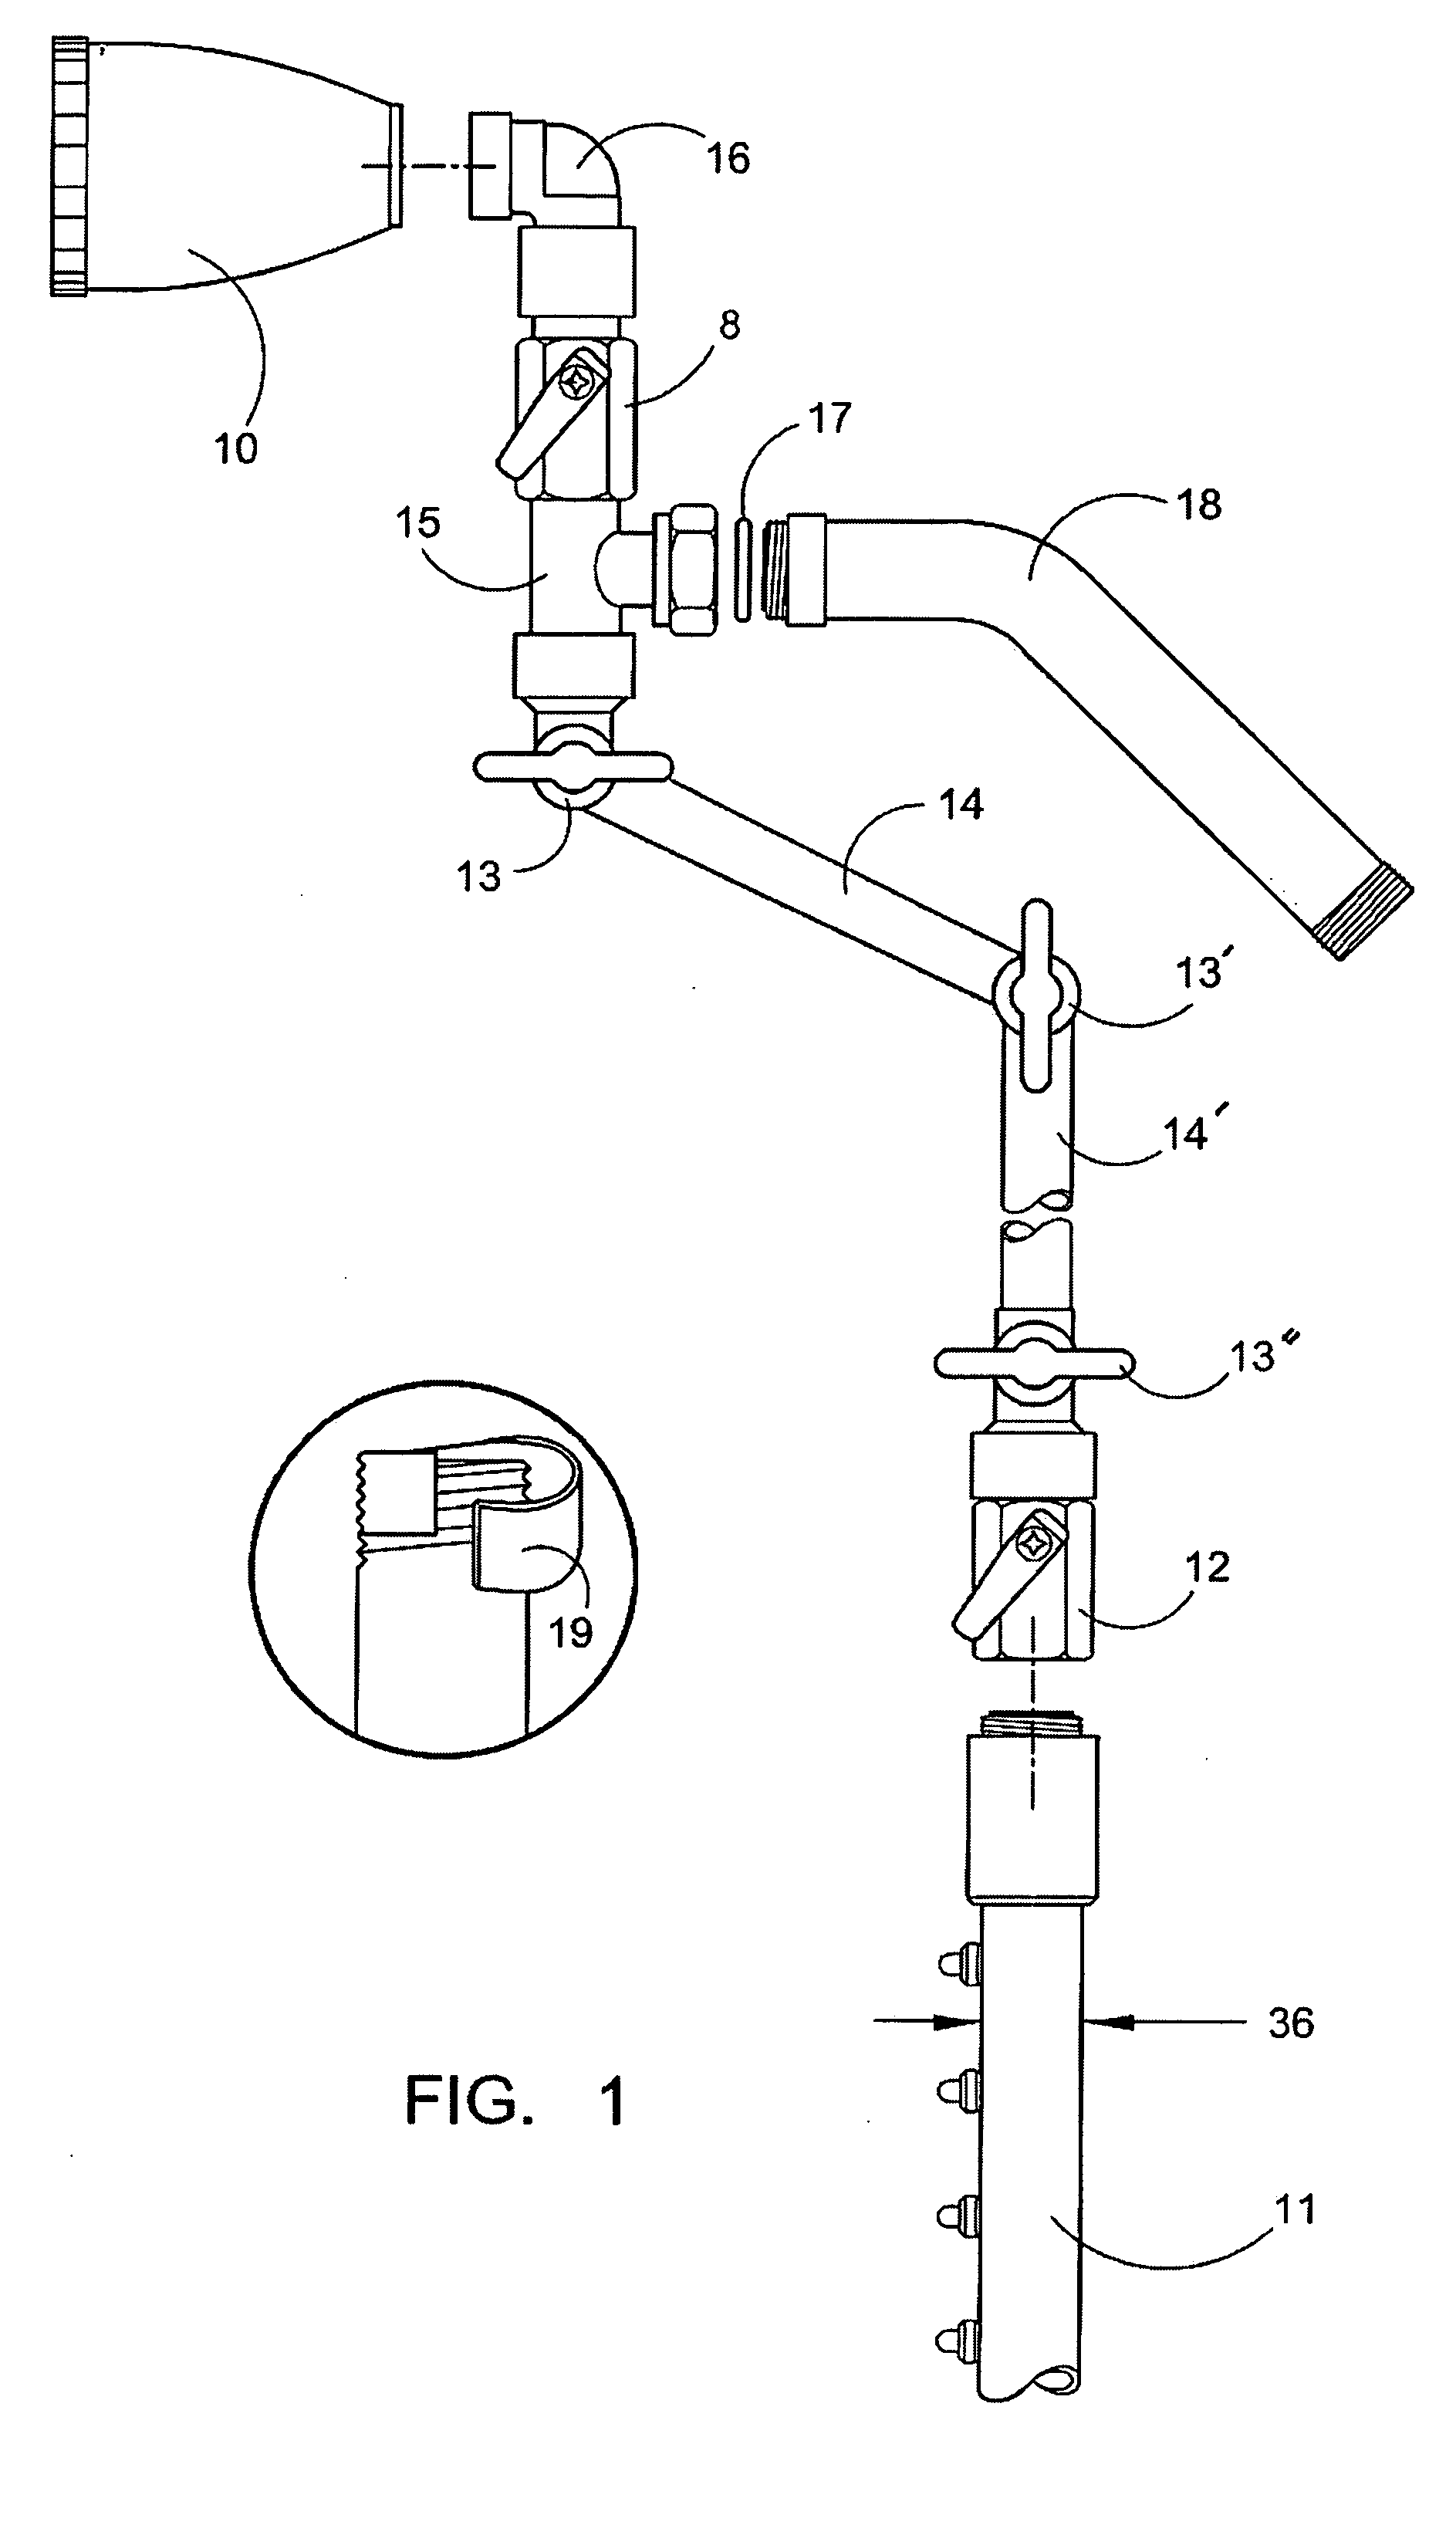 Method and assembly for conversion of a standard showerhead to a spray bar